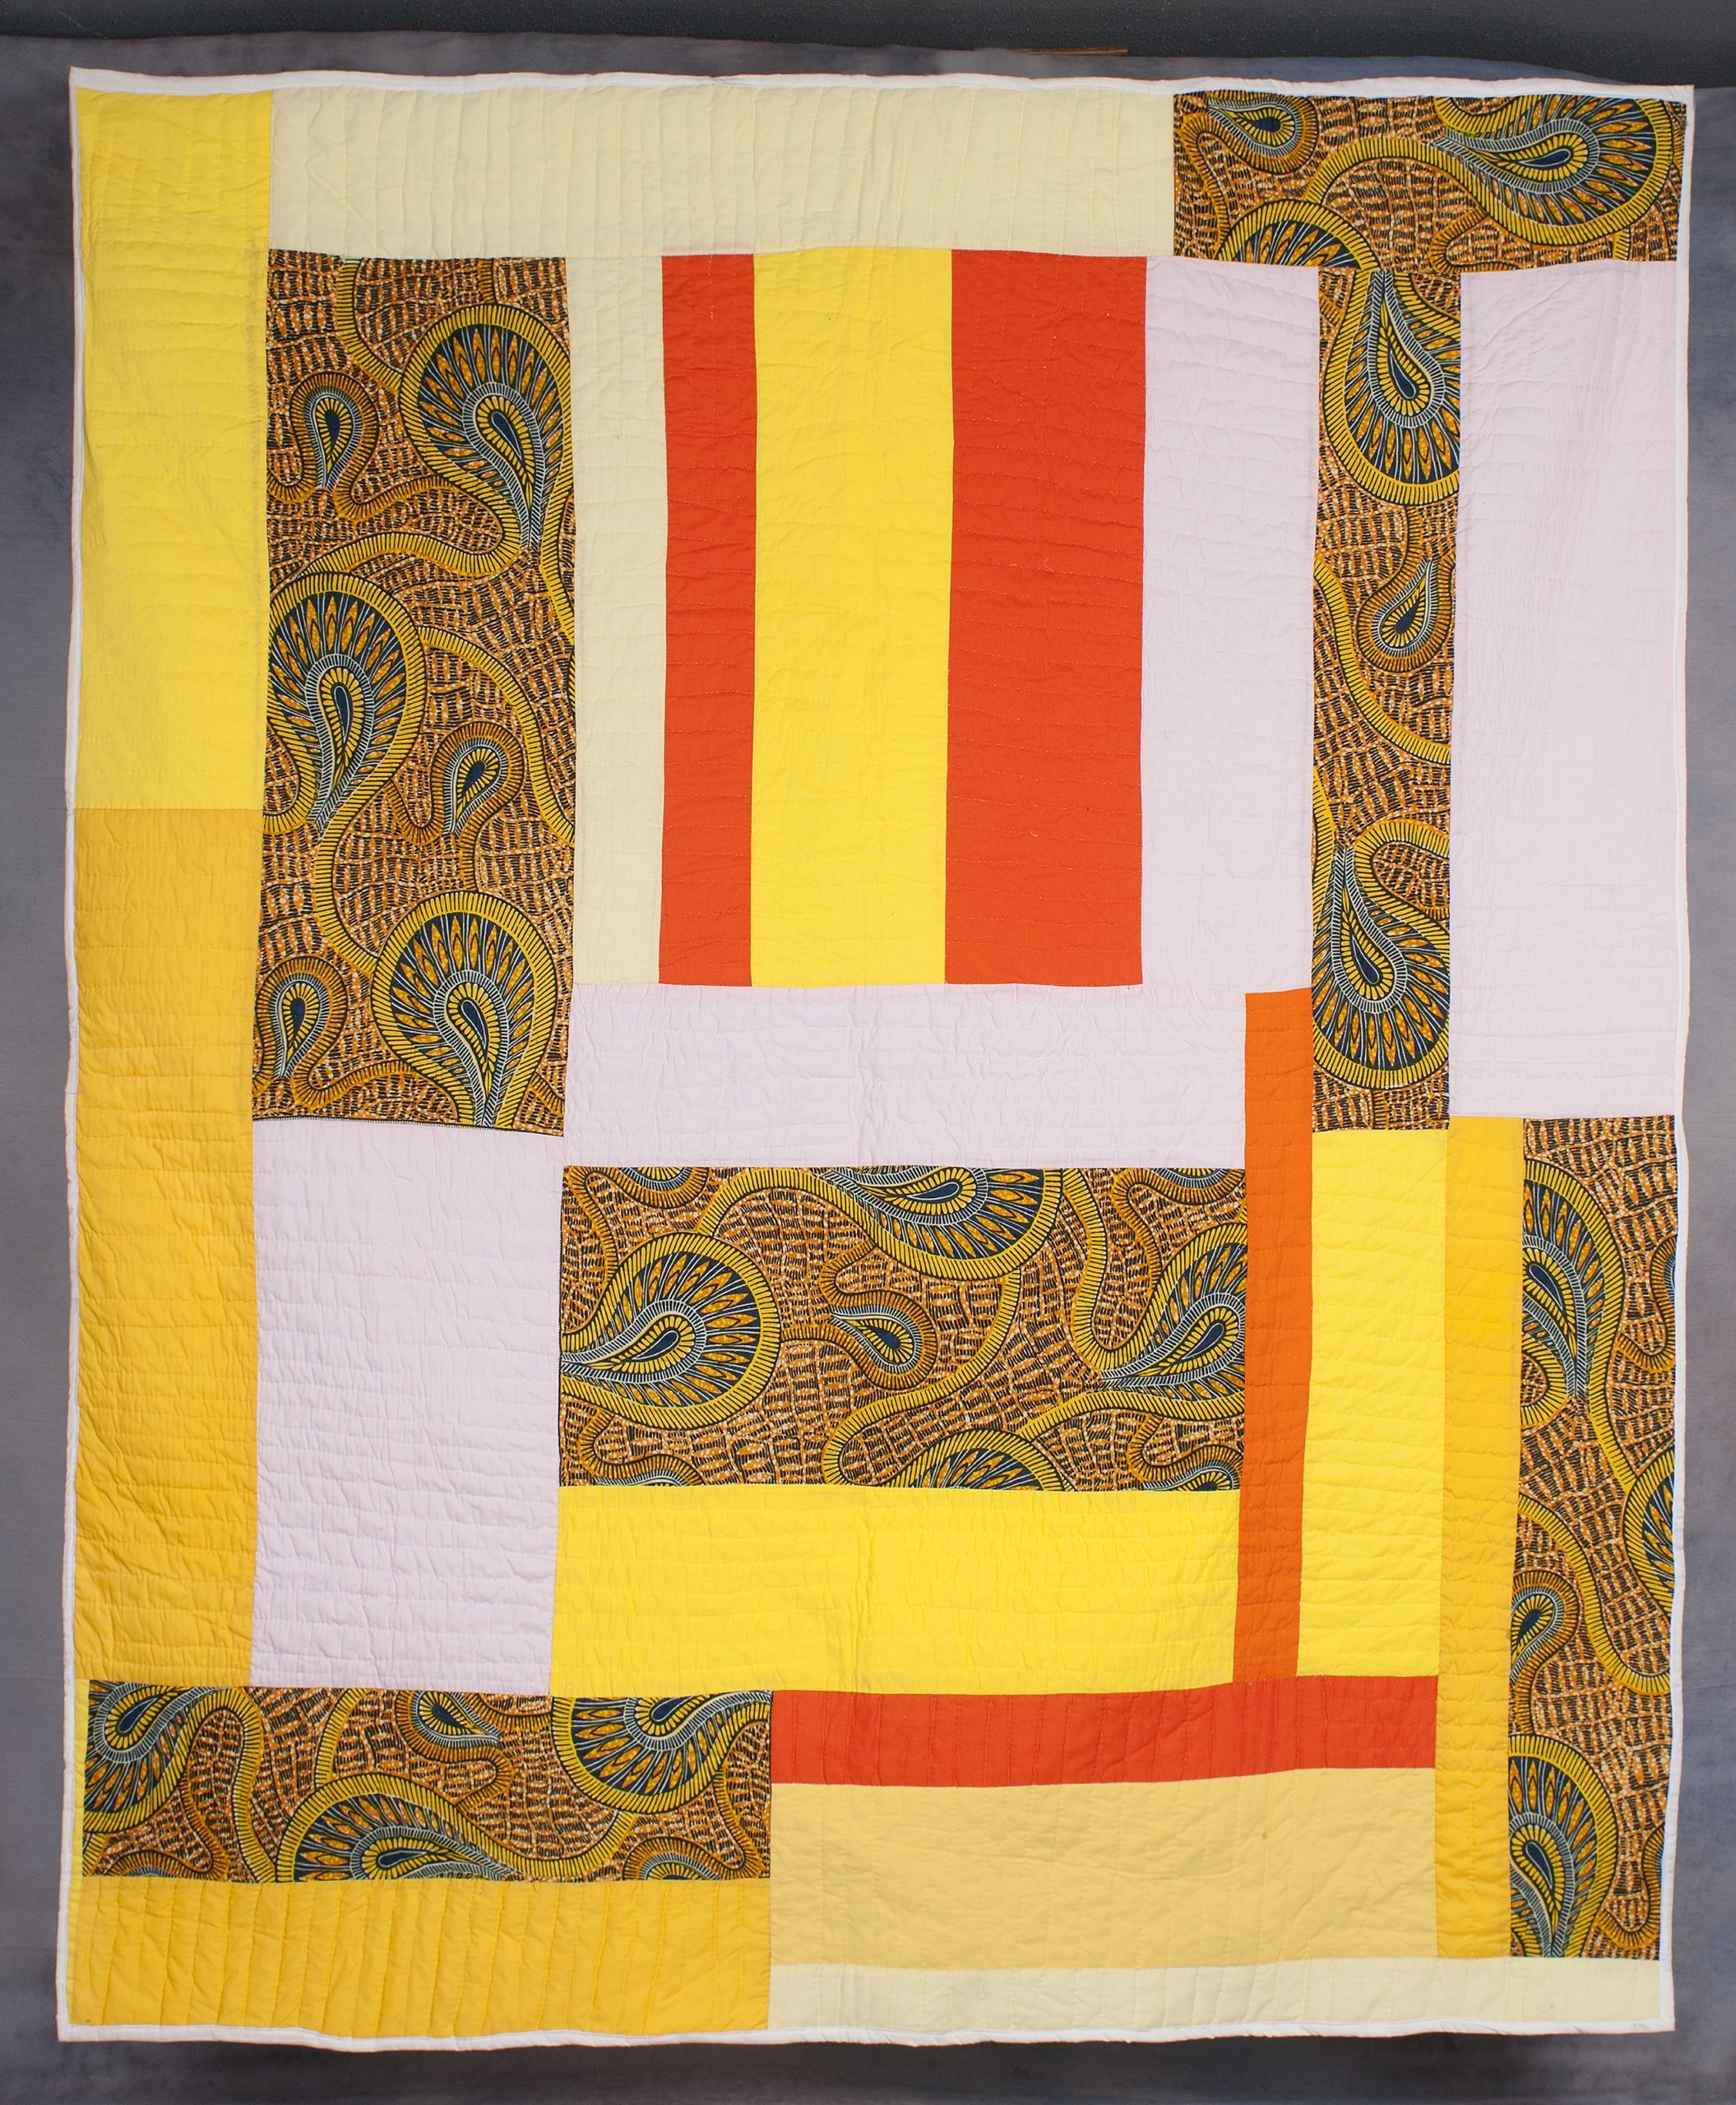 A photo of a textile made from combining various colored strips of cloth arranged in a geometric pattern with orange, yellow, white and gold paisley.